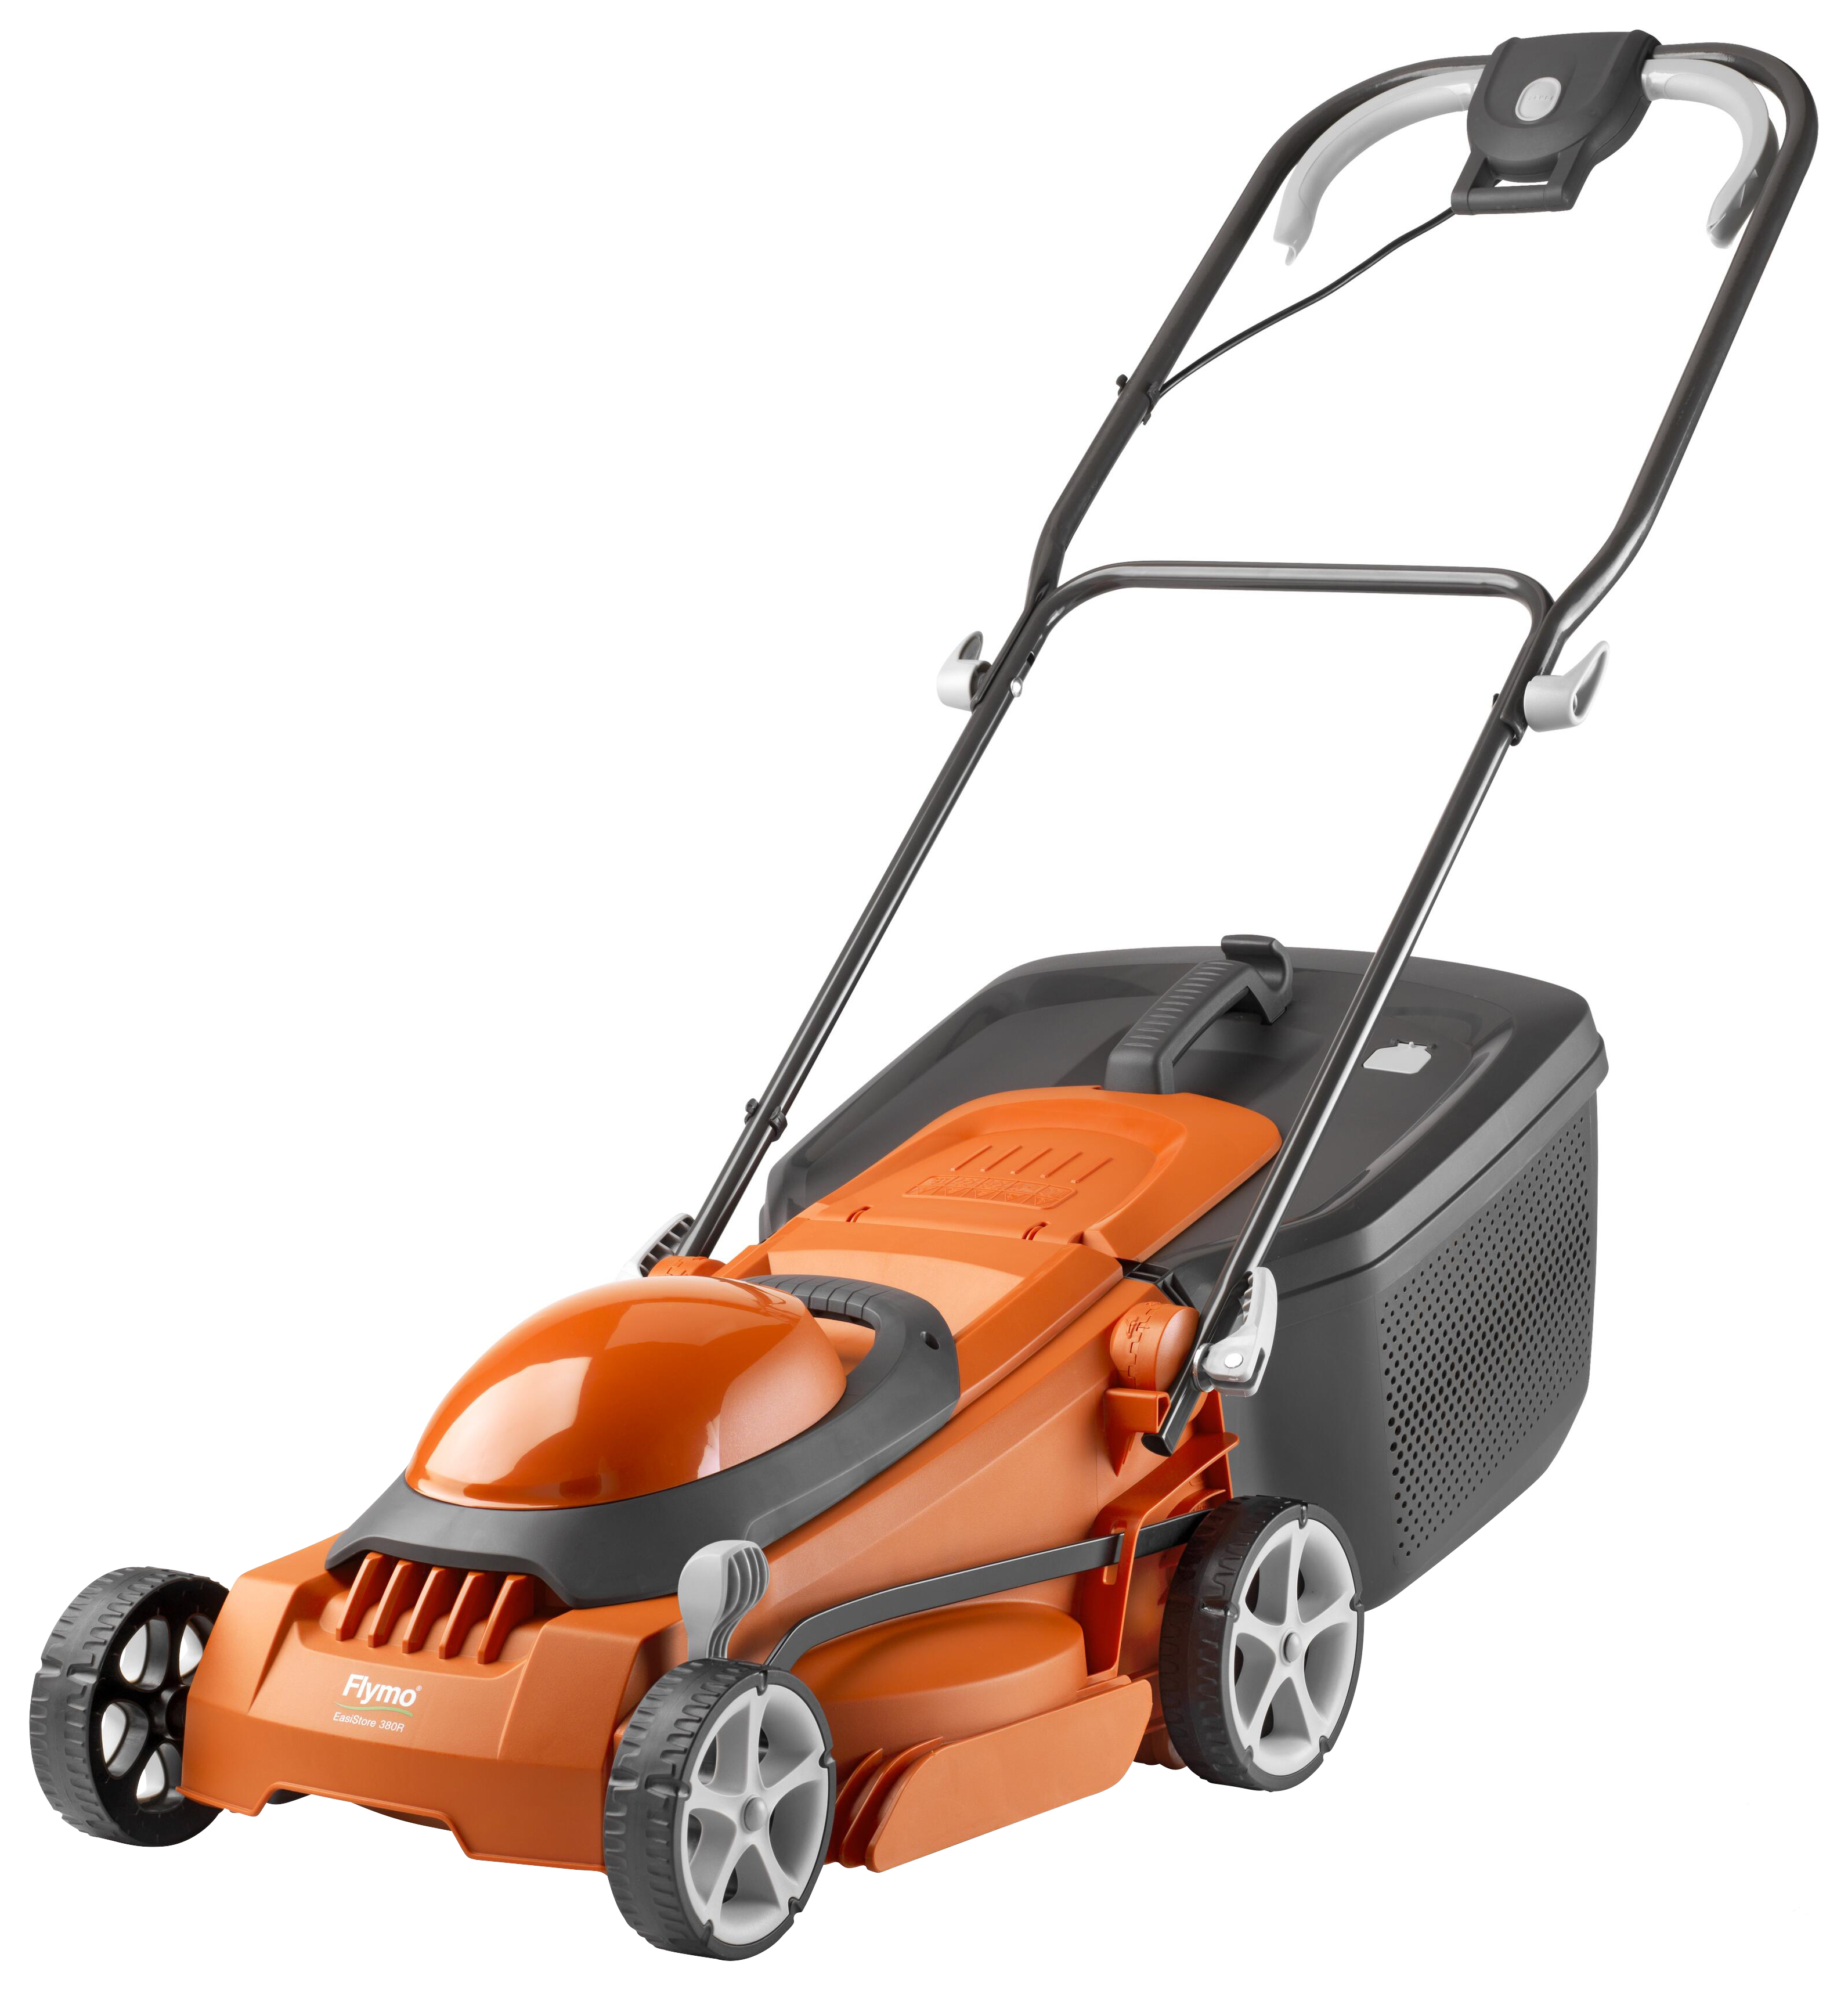 Image of Flymo EasiStore 380R Corded Rotary Lawnmower - 1600W